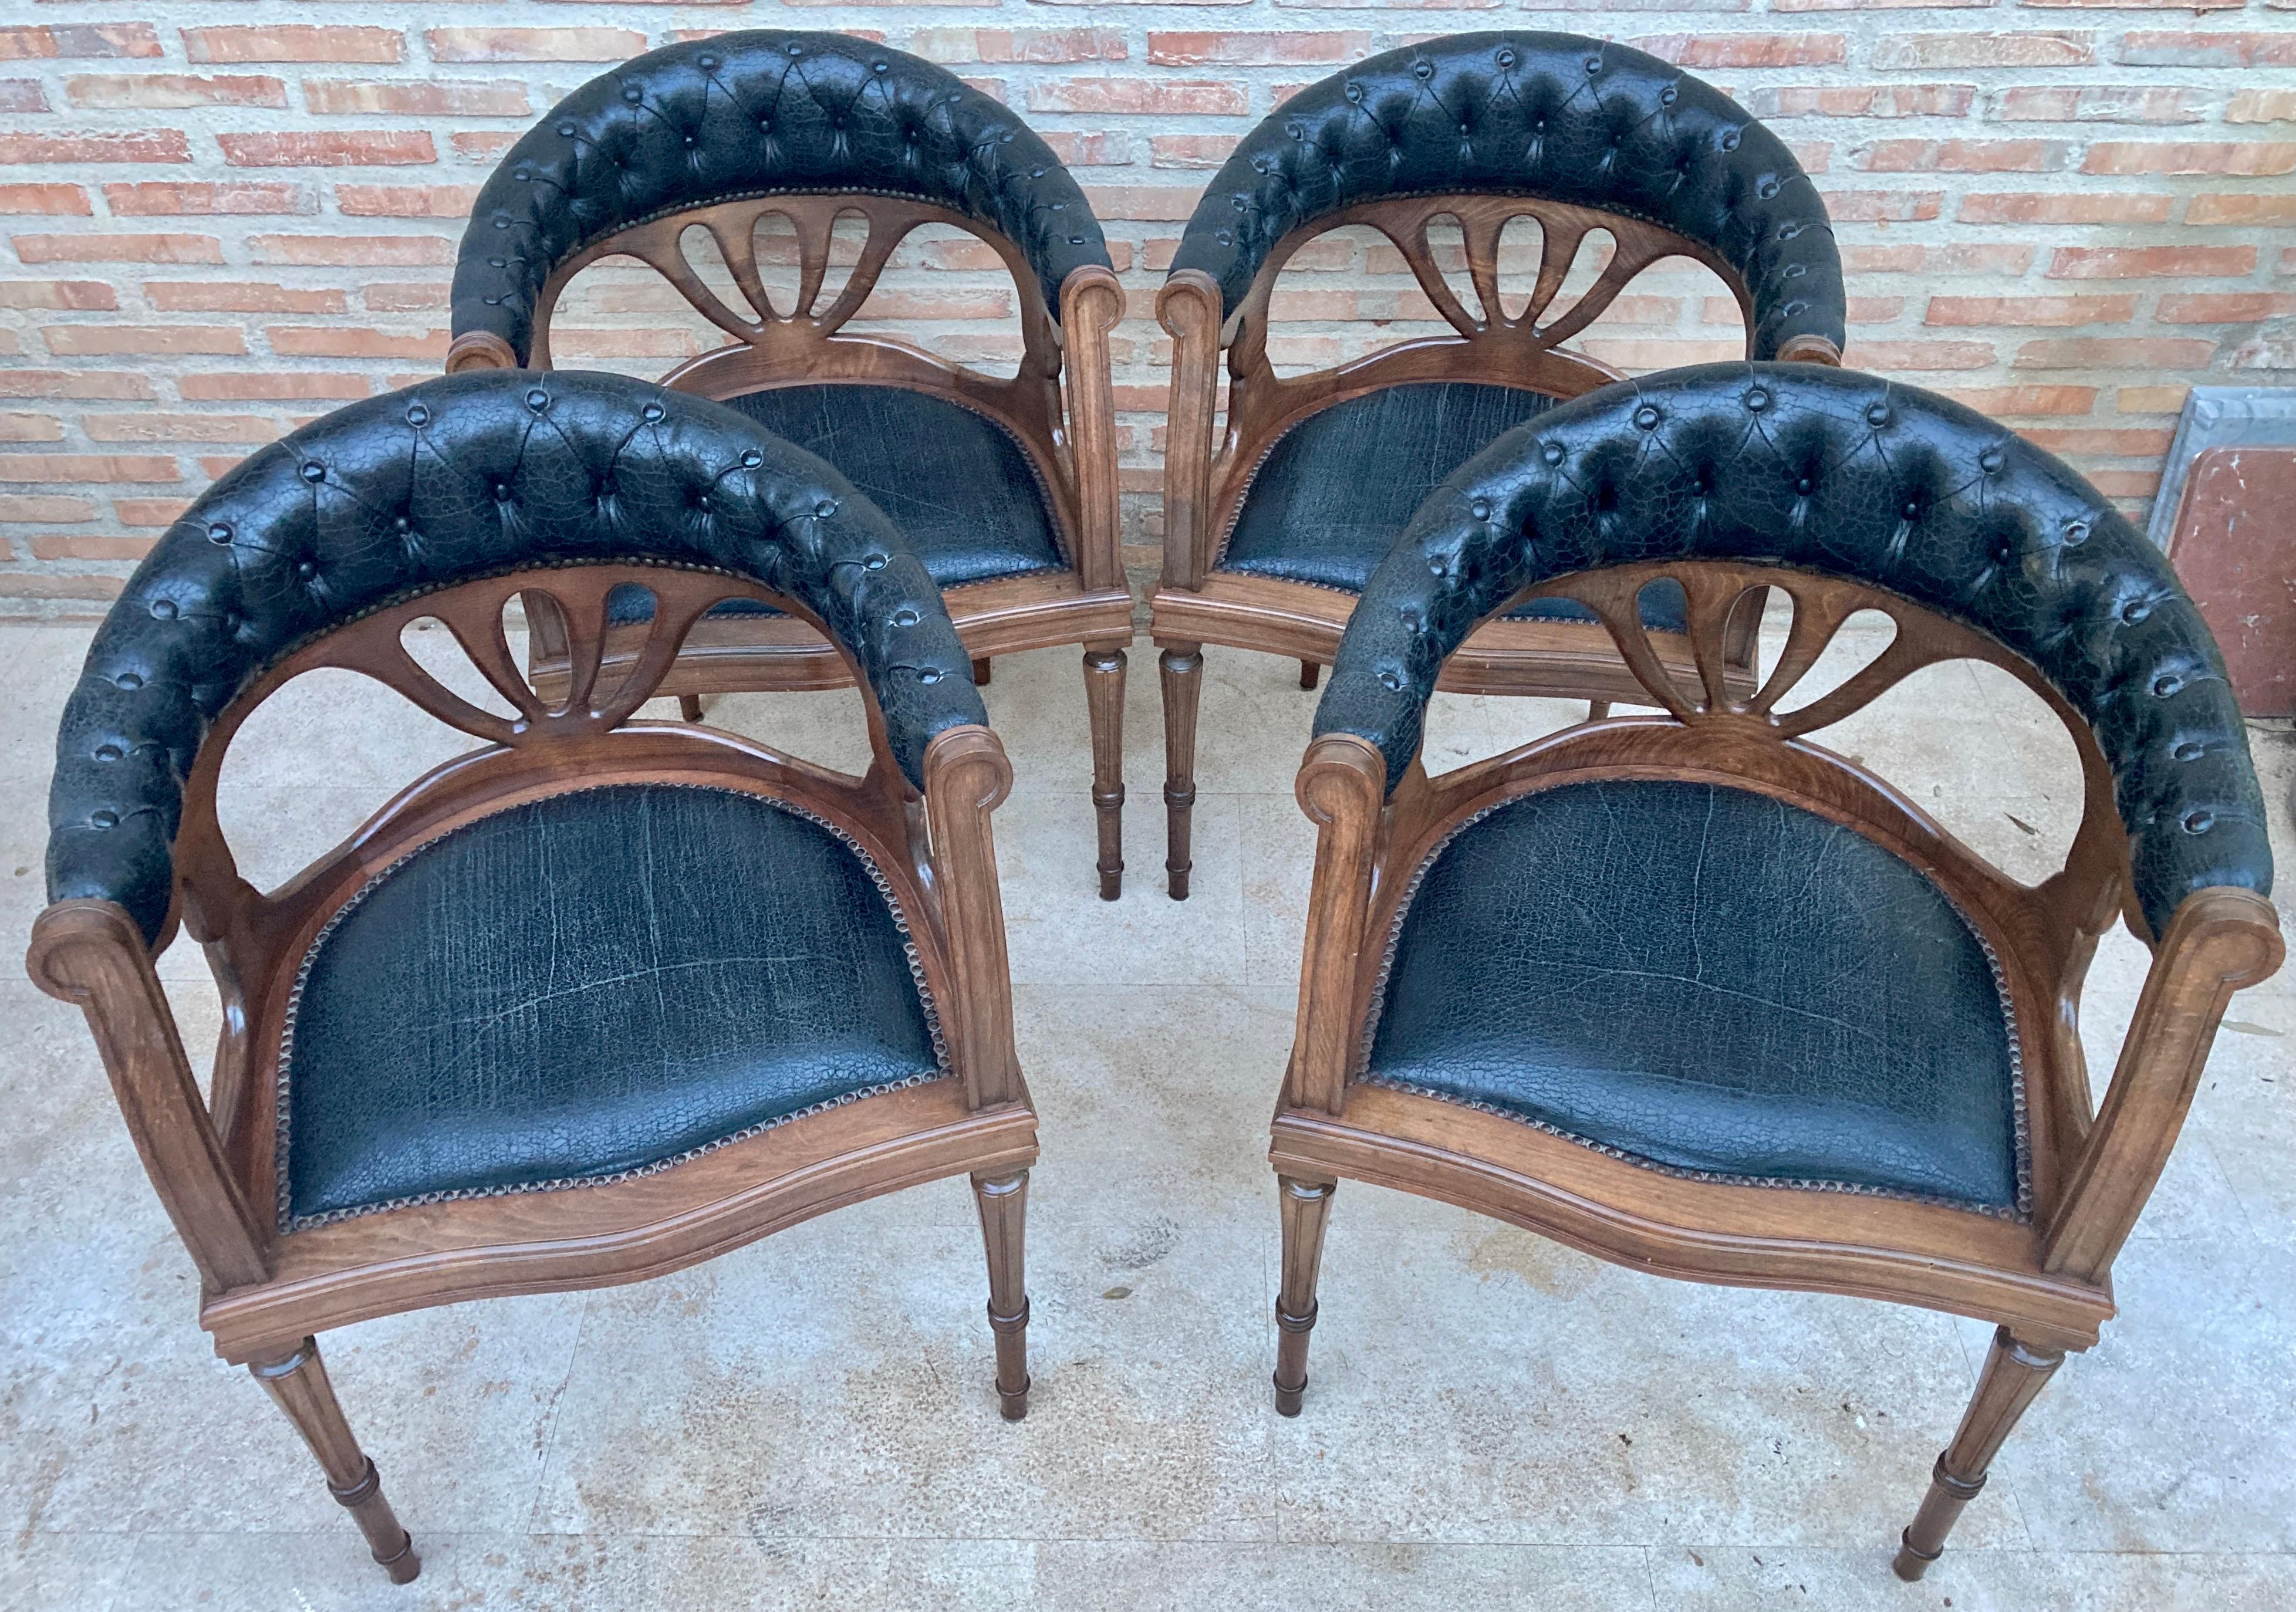 Set of 4-piece walnut wood armchairs and vintage leather seat. Around the 1950s. 
The characteristic of the chairs is that they come with their original black leather upholstery, slightly worn by use, but well preserved. 
The set is in good original